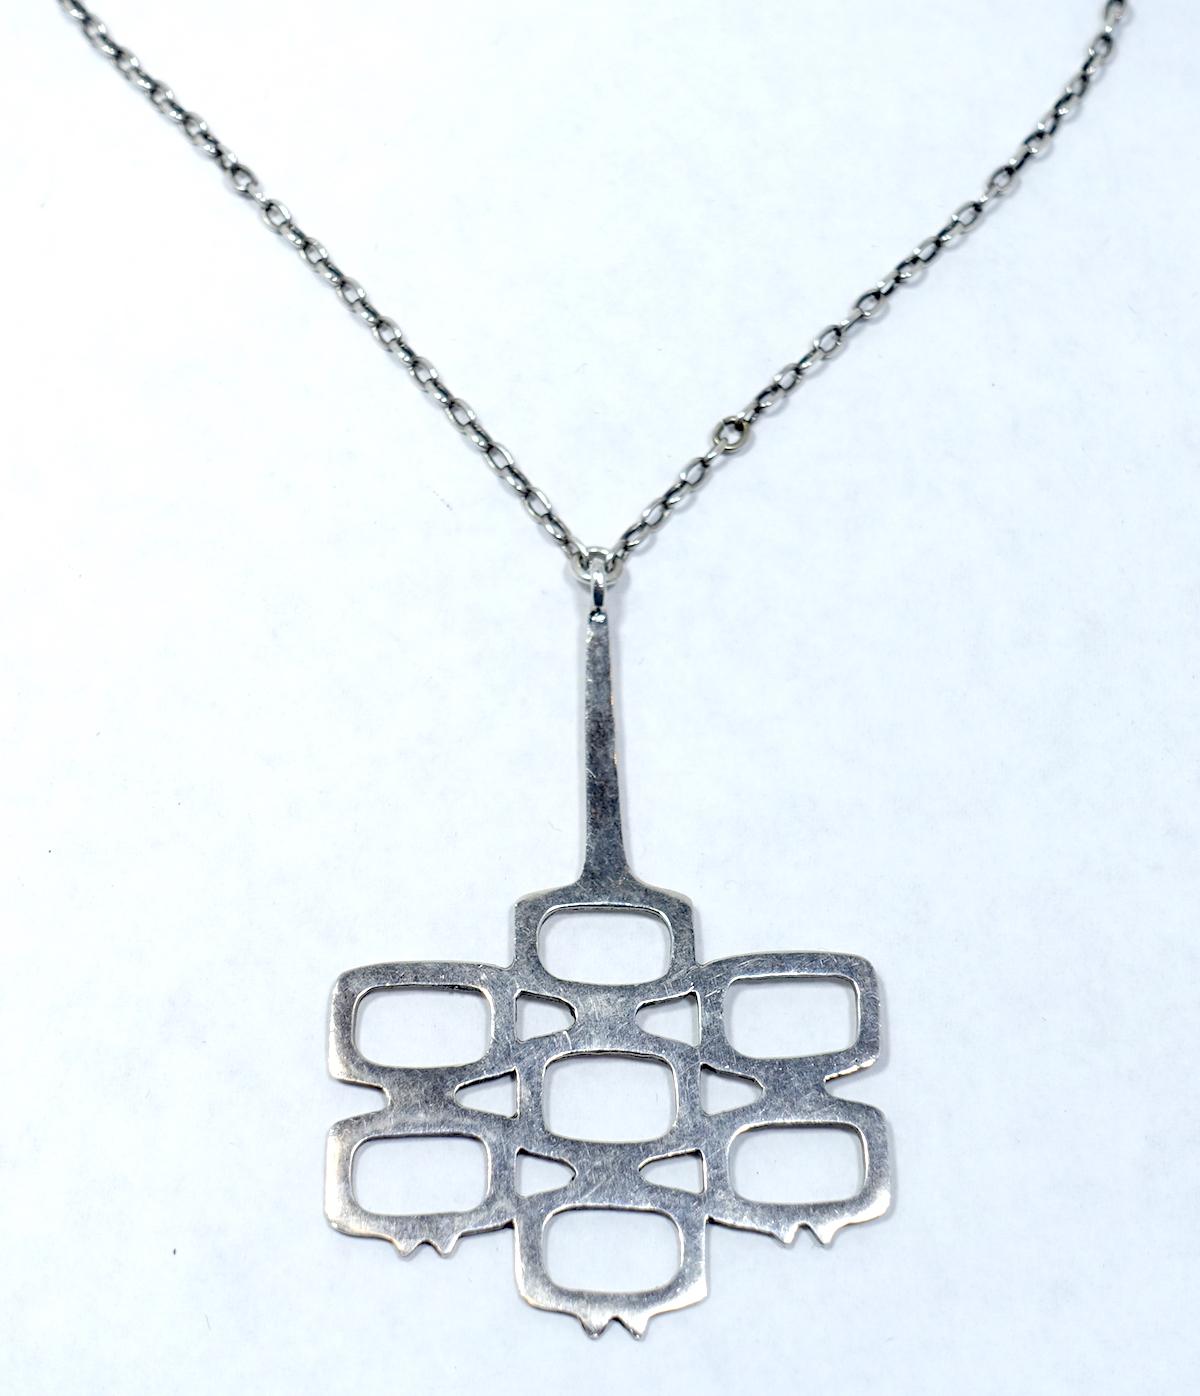 This vintage necklace features an abstract design in a sterling silver setting.  In excellent condition, the pendant measures 3-1/4” x 2-1/4”; the length of the link chain is 21” x 1/8” with a spring clasp.  